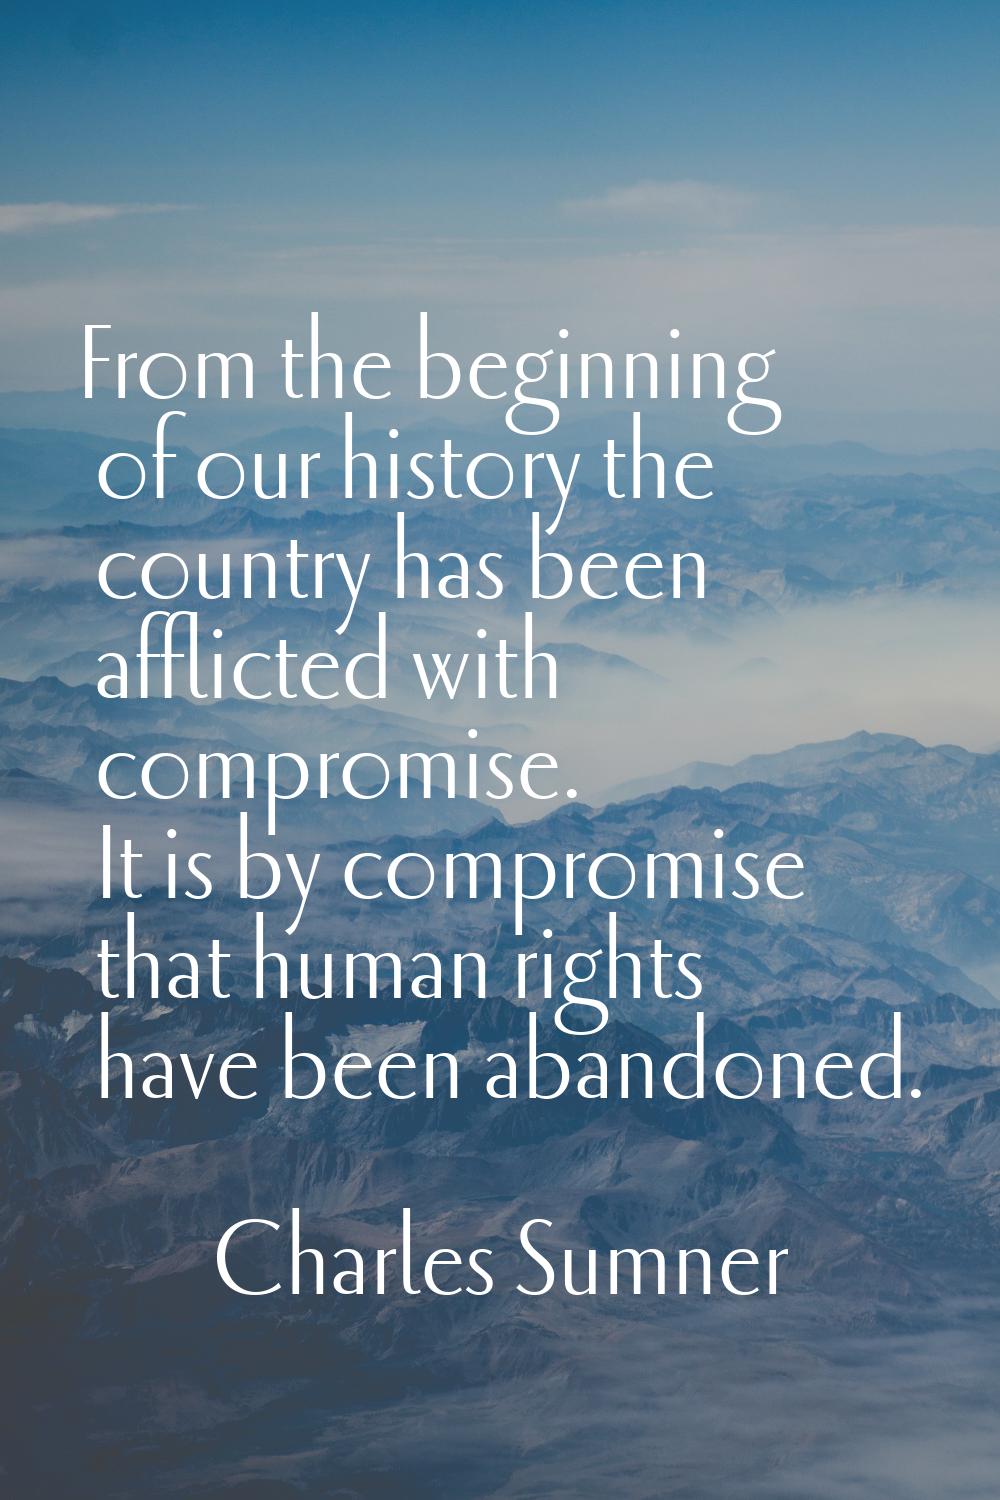 From the beginning of our history the country has been afflicted with compromise. It is by compromi